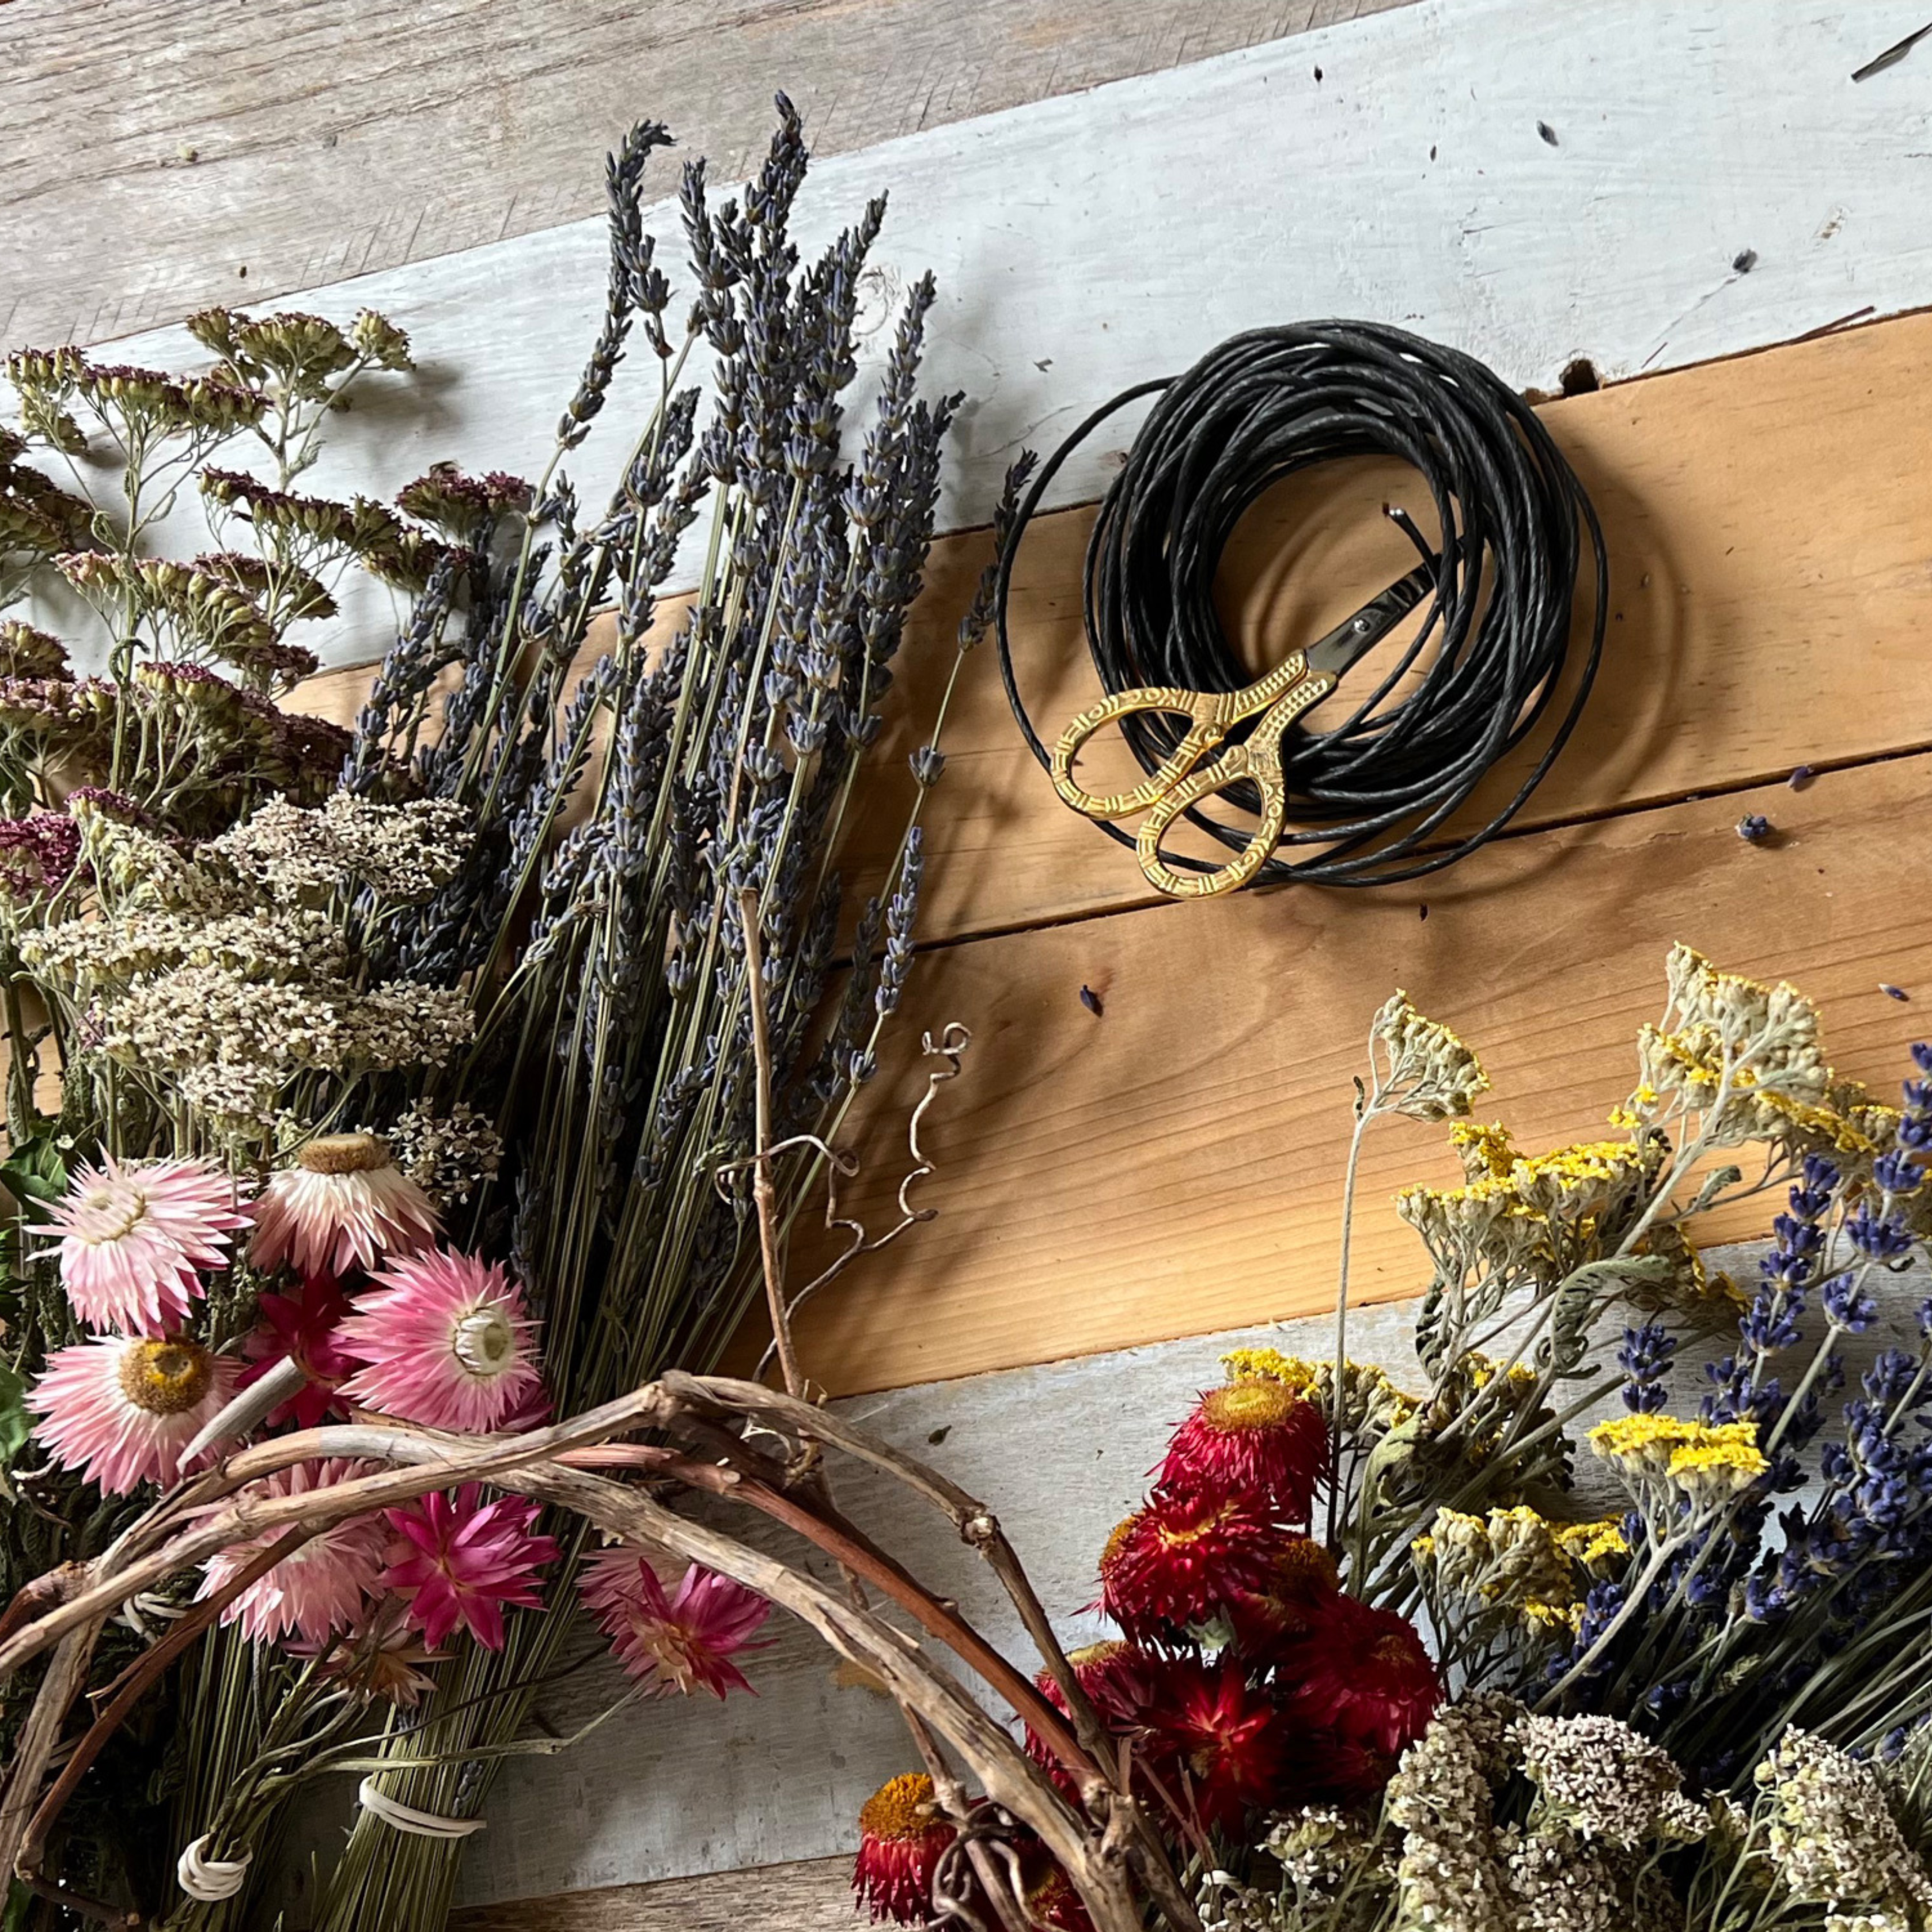 Dried Wreath Workshop at Tullamore Lavender Co. - September 24th